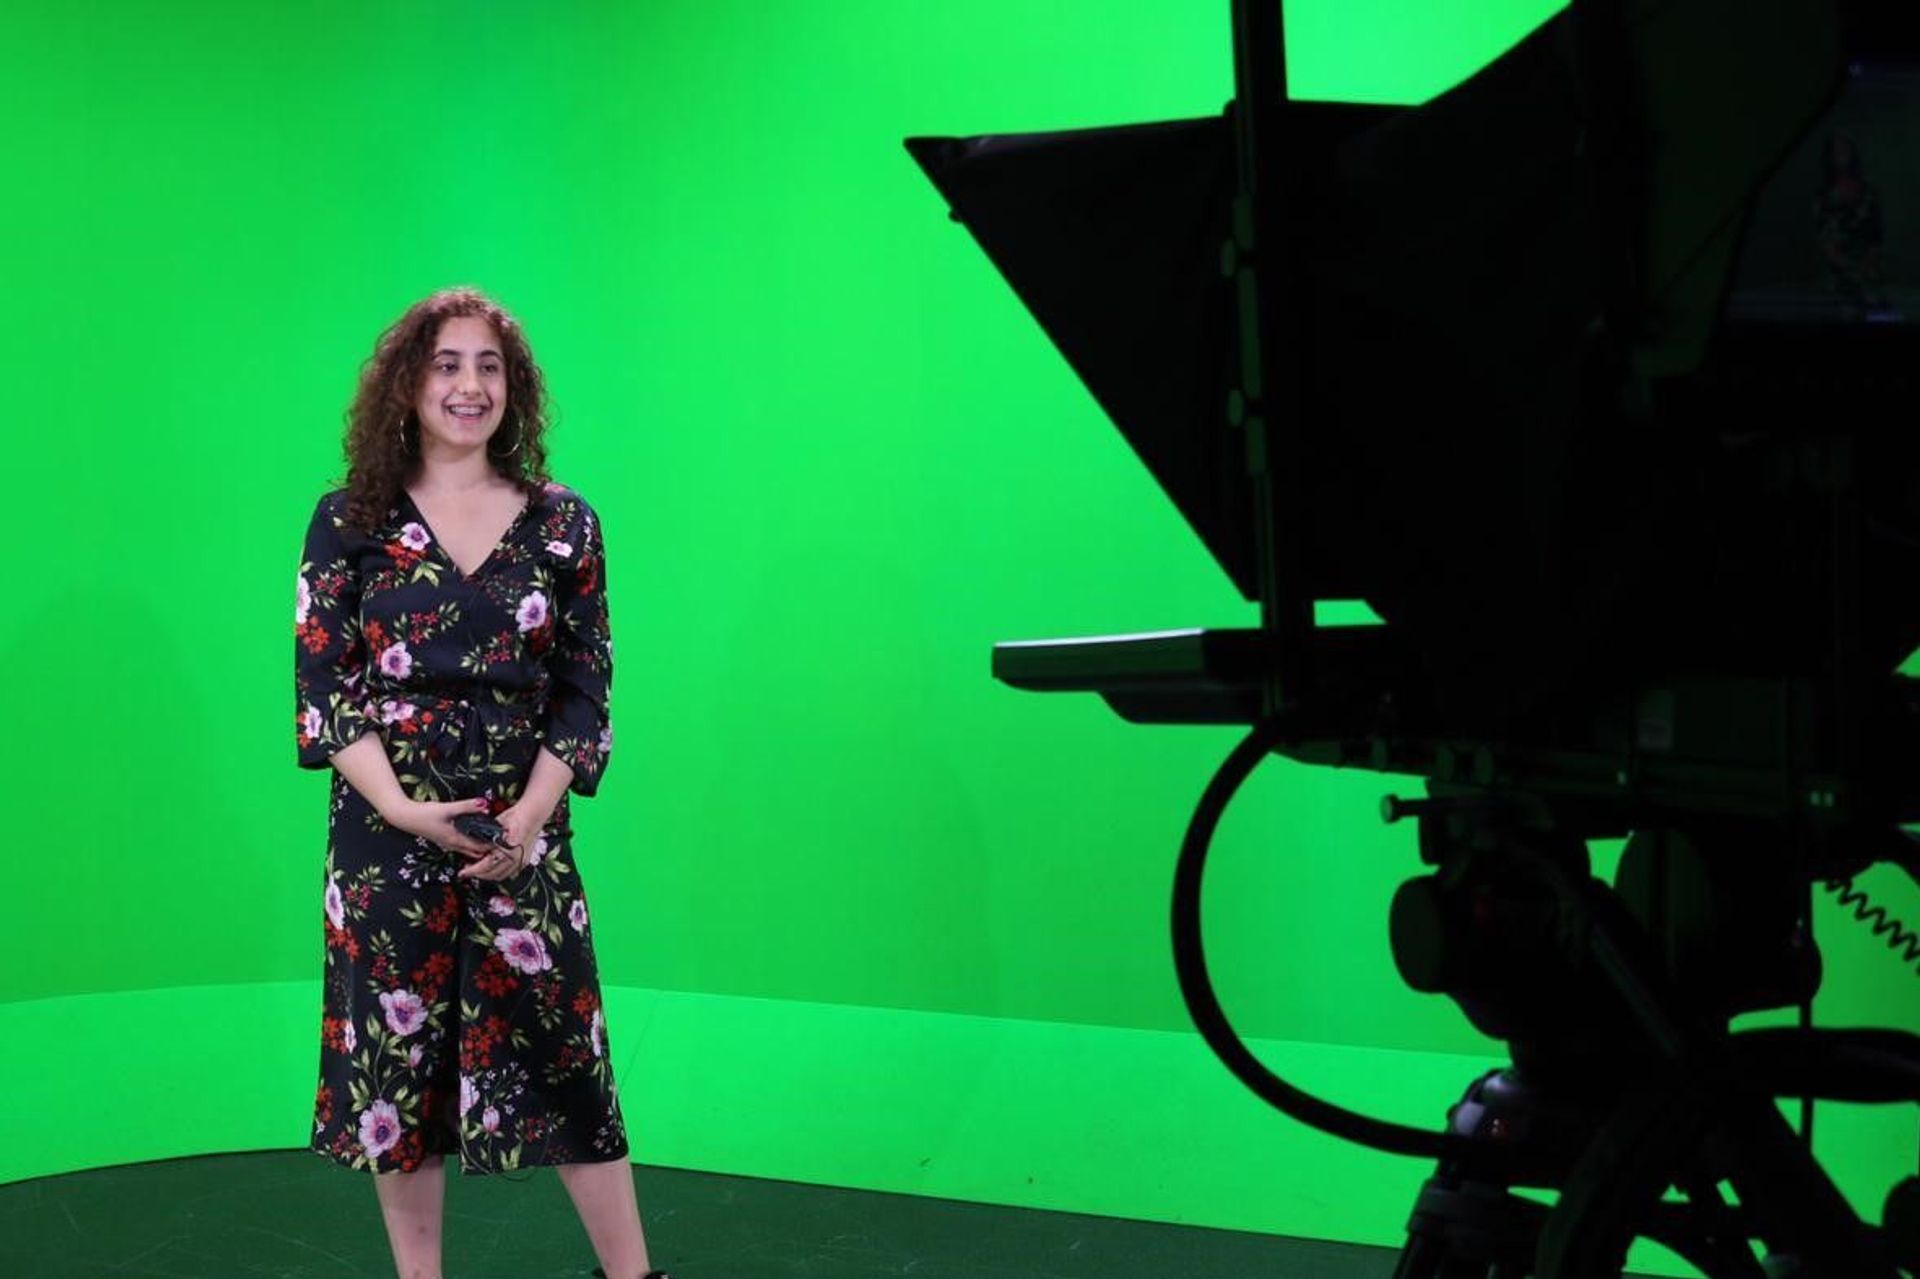 An image of a woman in a flowery dress standing in front of a film camera smiling in a green screen room